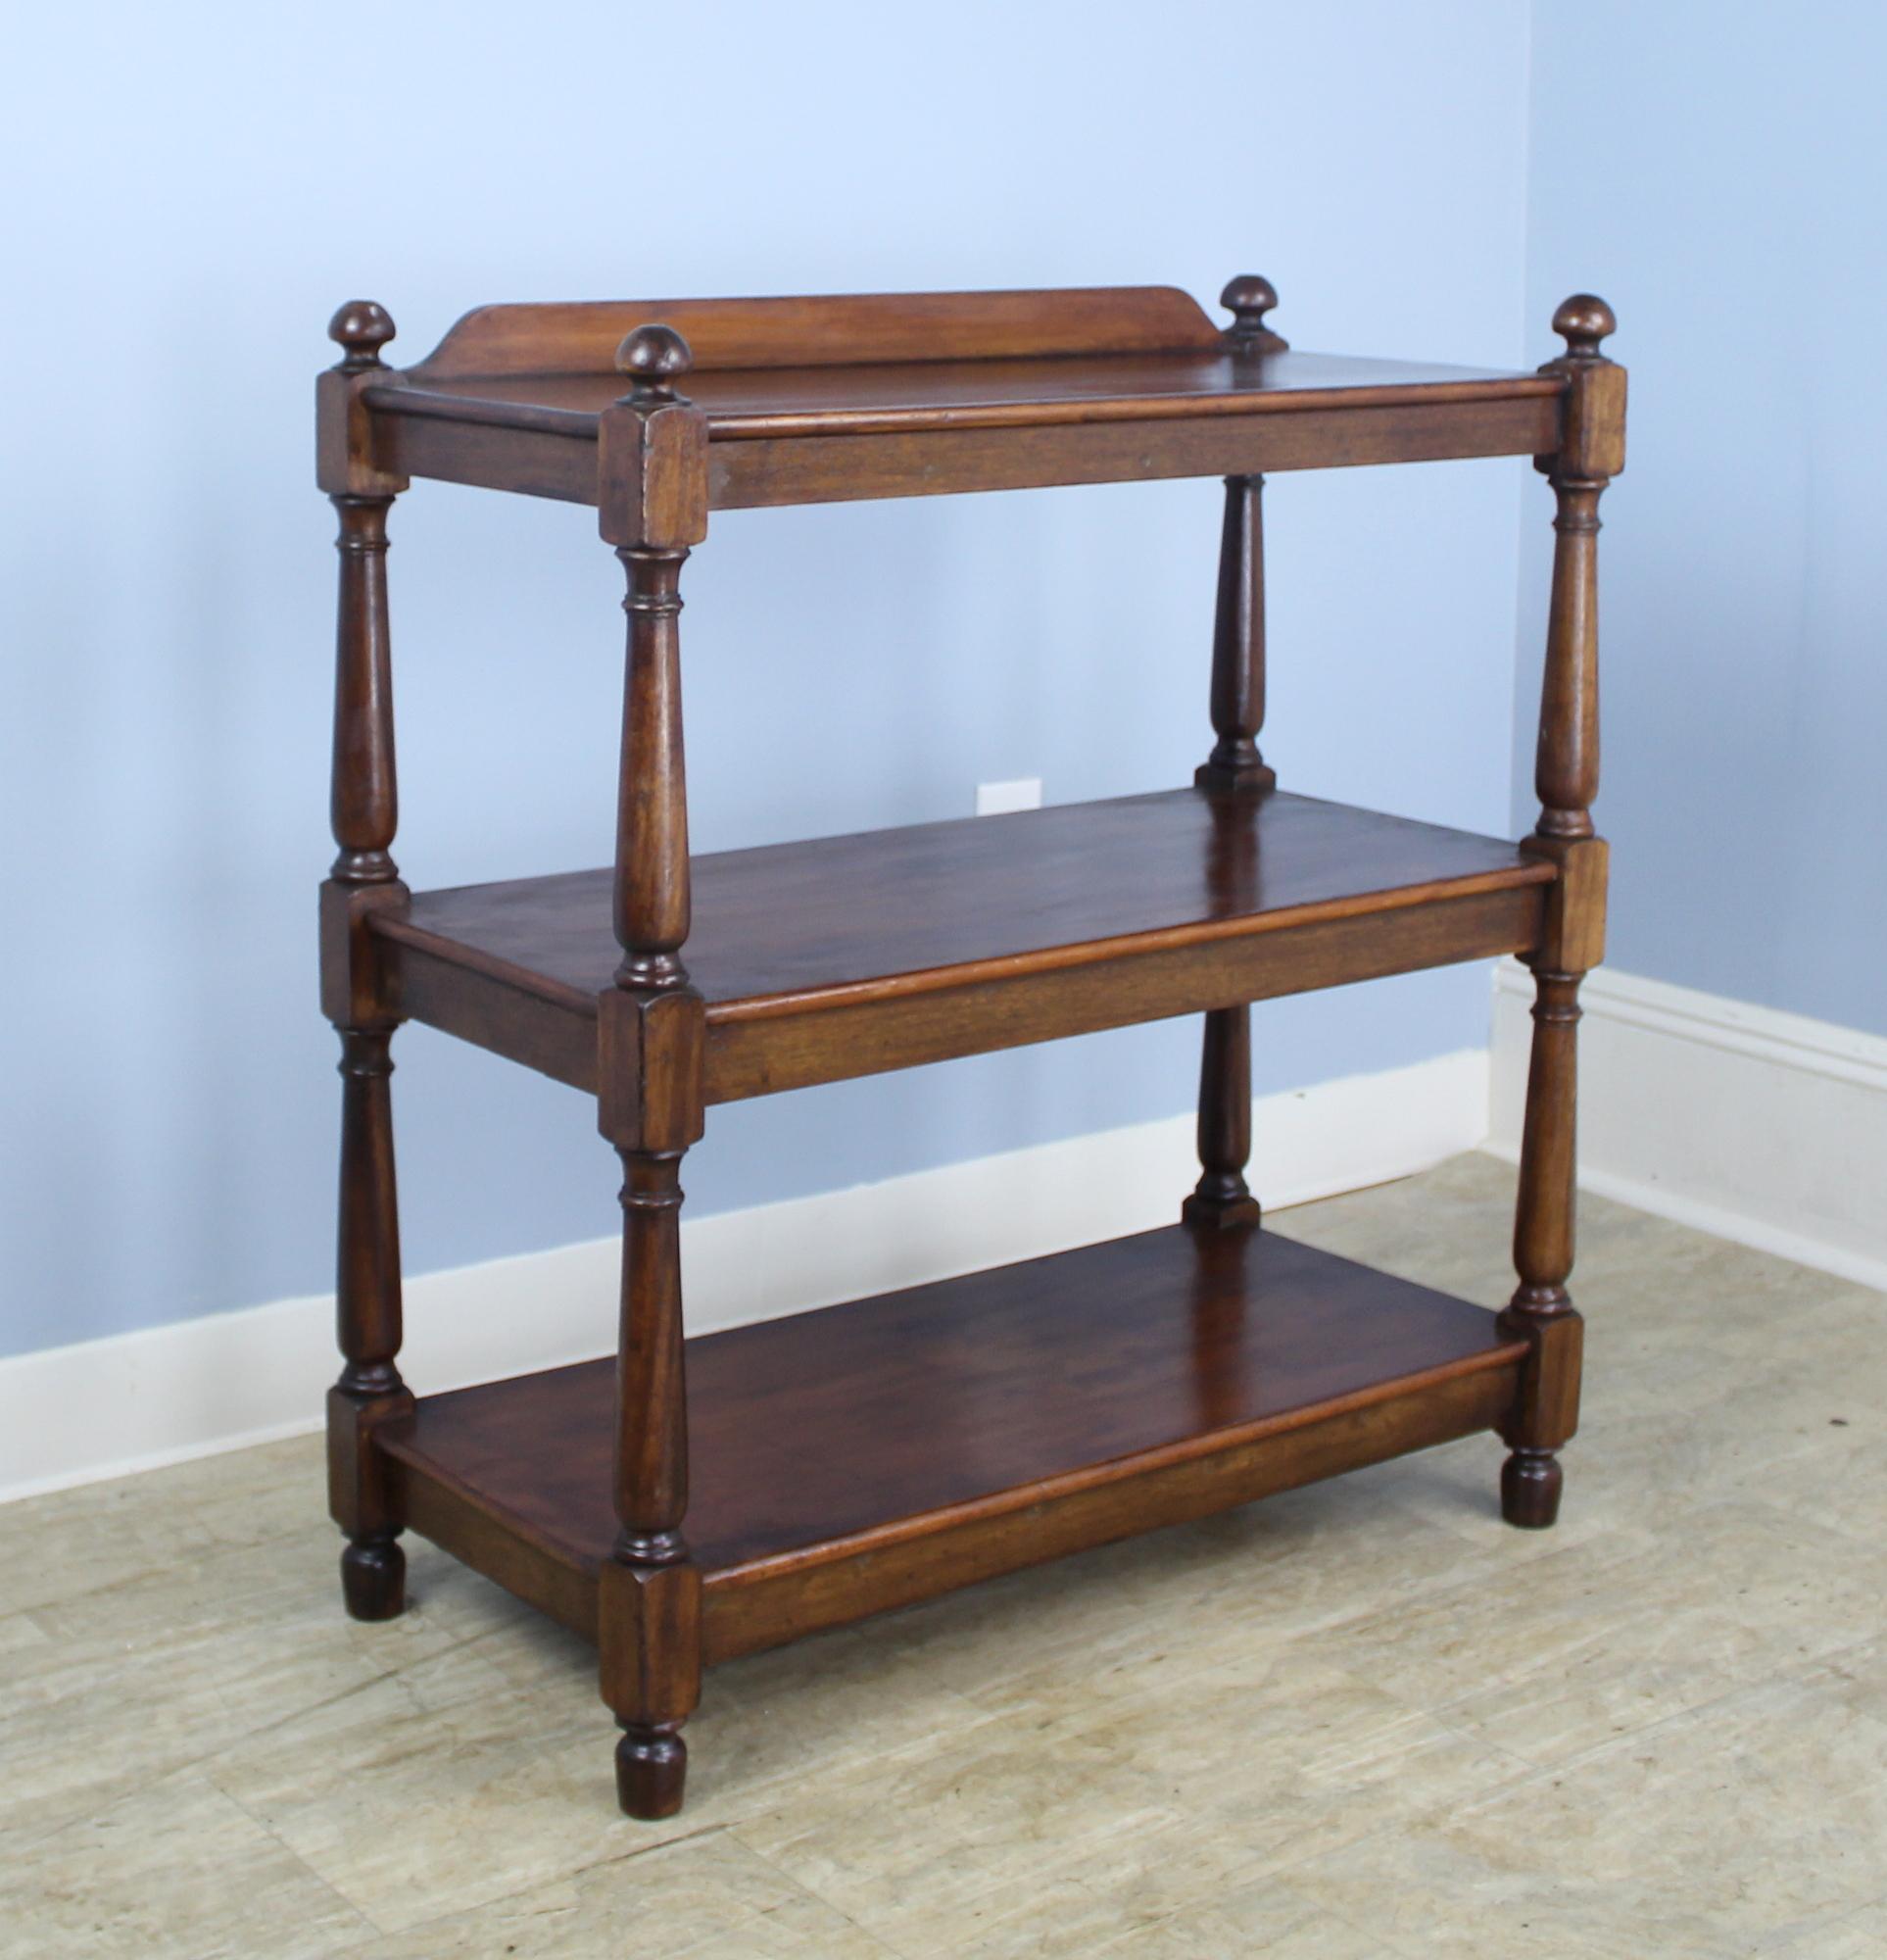 An antique dumbwaiter, shelf, or serving piece in rich dark fruitwood. In very good condition with nice patina. Approximately 11.5 inches in height between the shelves. There are so many possible uses for this piece that we cannot list them!